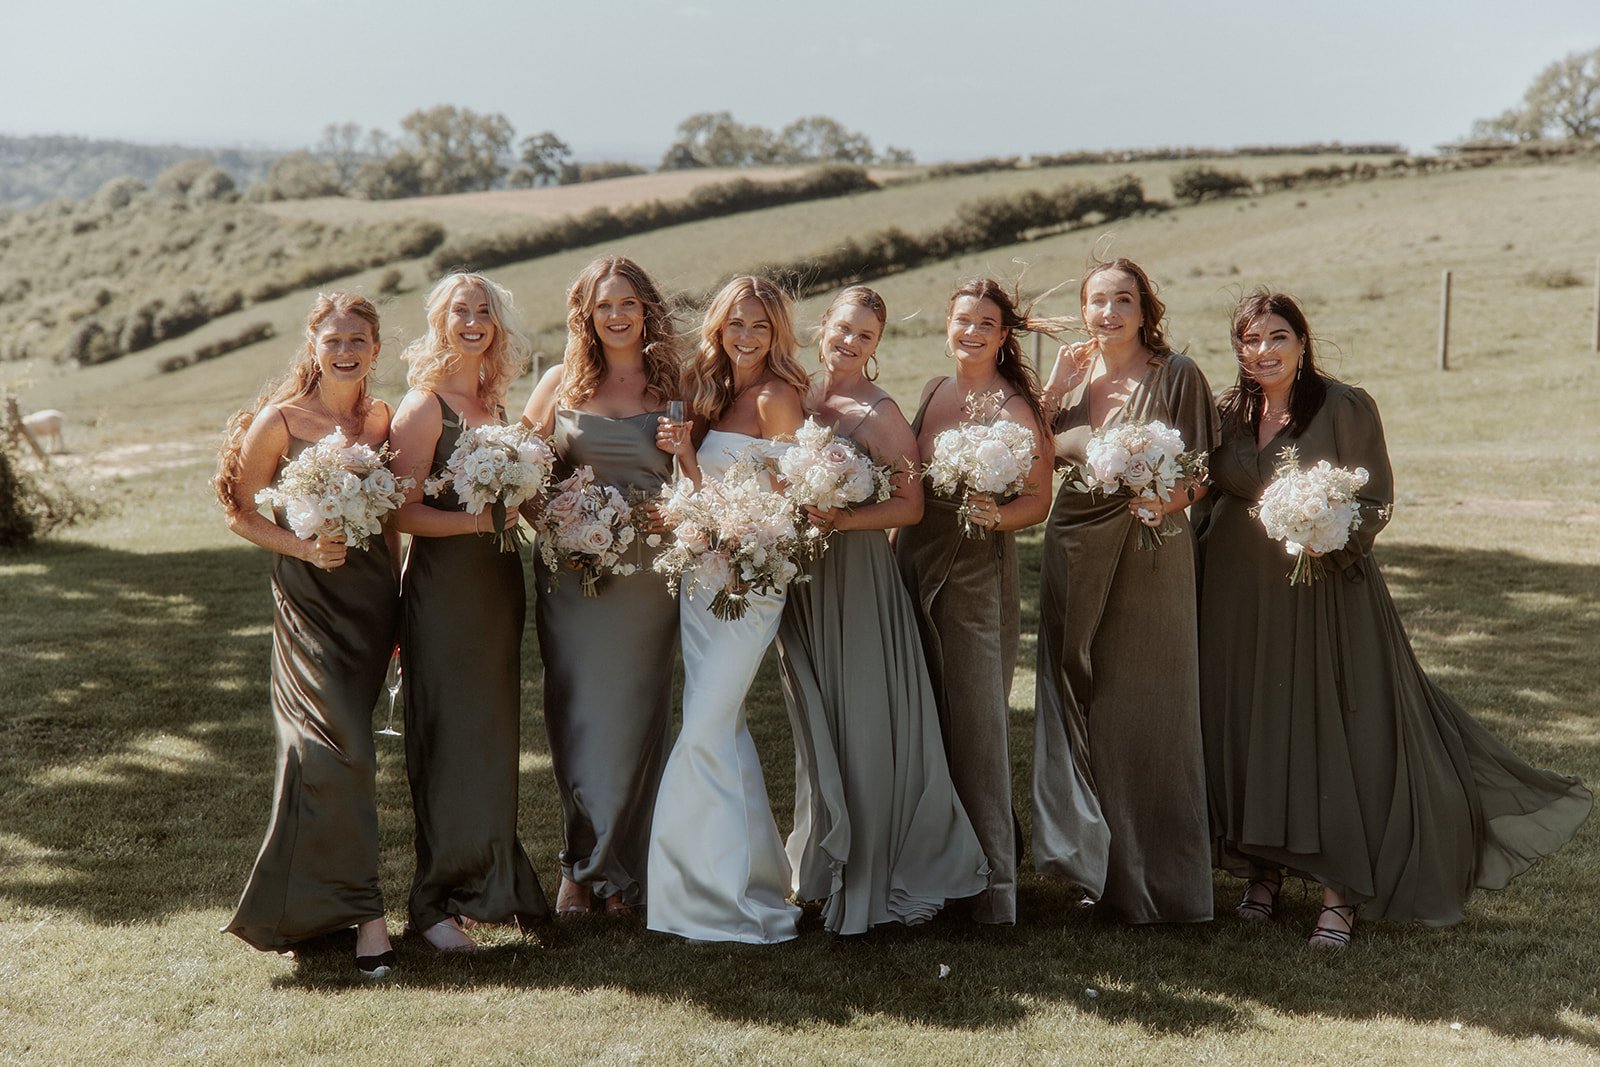 Beautiful bride Rosie wore the Harbour wedding dress by Halfpenny London